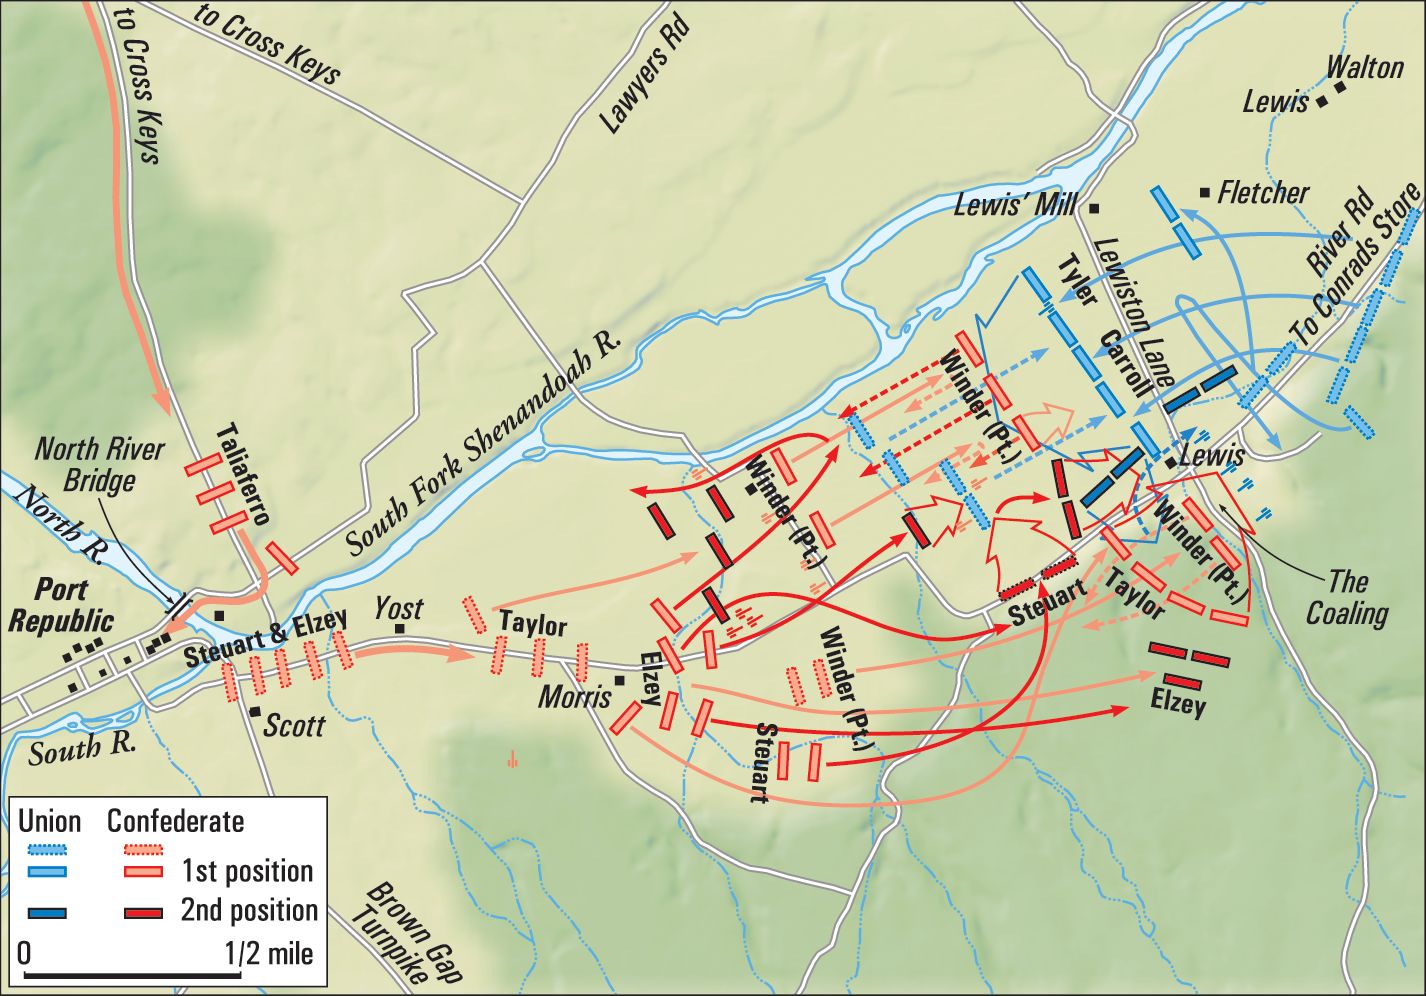 Jackson discerned that the key to victory at Port Republic was the capture of the Union guns at the Coaling. Once the Southerners had silenced the guns, Brig. Gen. Erastus B. Tyler’s attack quickly unraveled. 